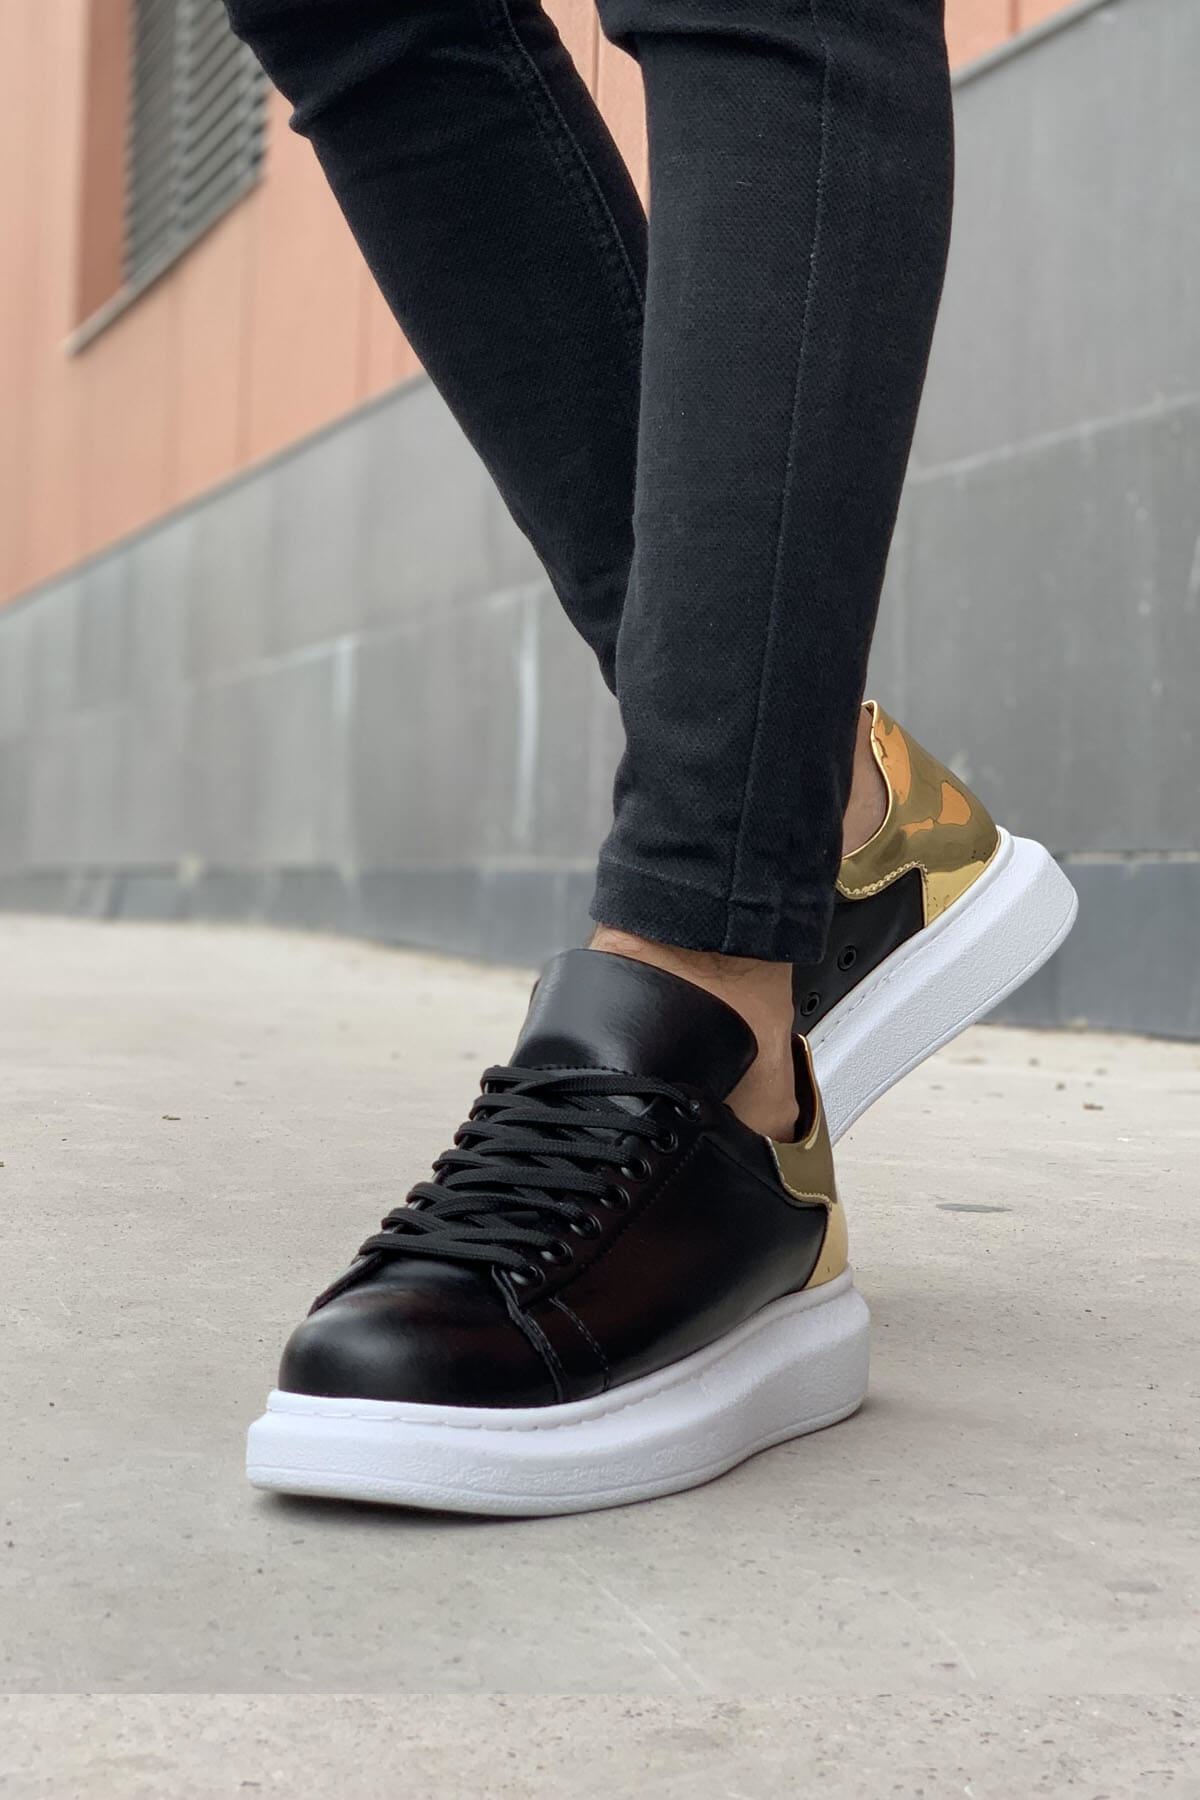 CH259 BT Black / Gold Men's Sneakers Shoes - STREETMODE ™